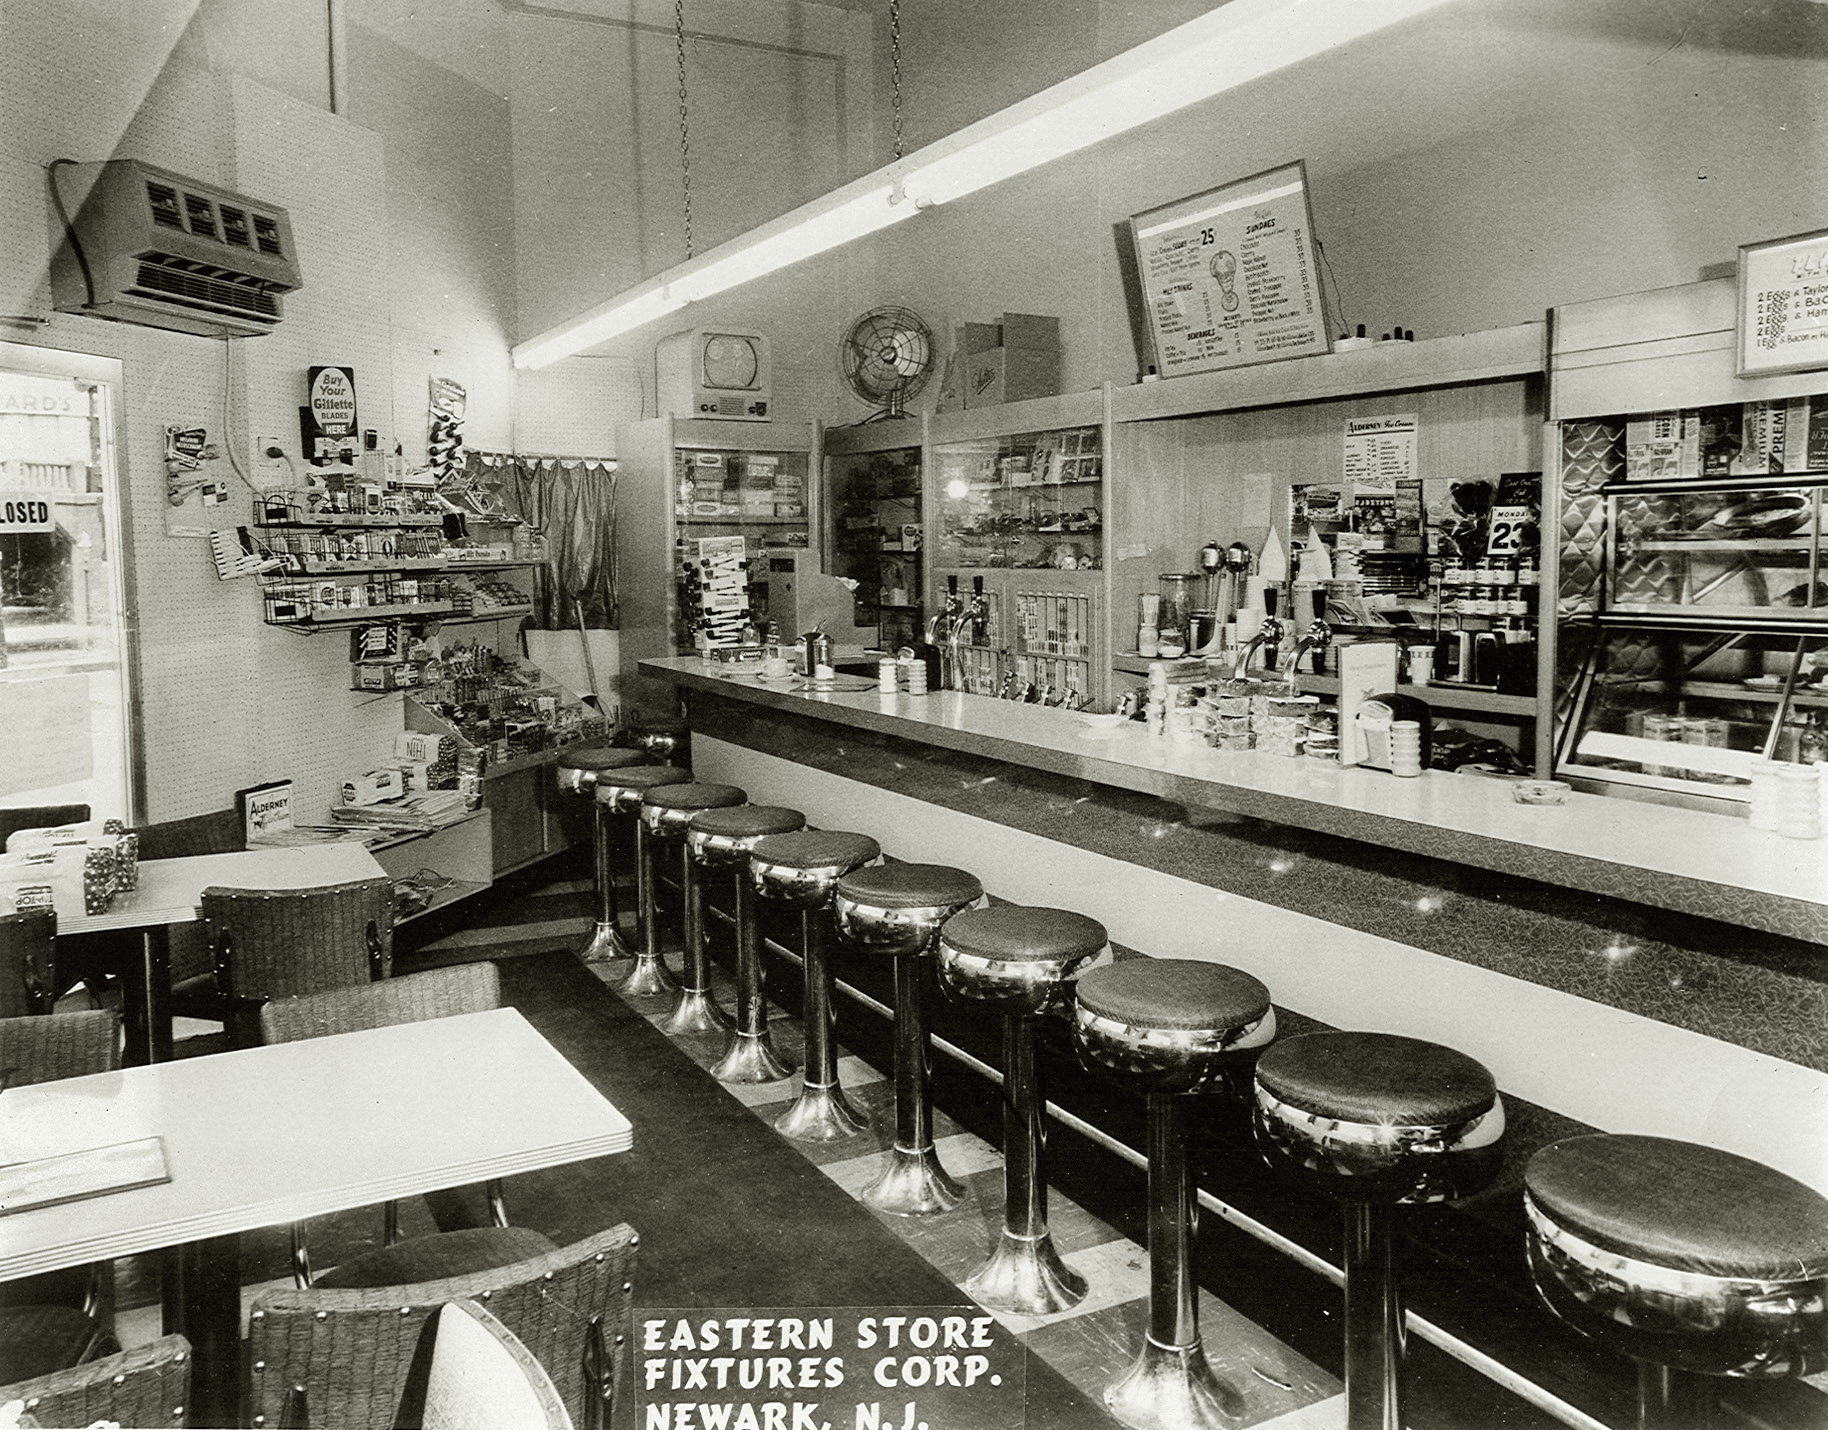 A New Jersey lunch counter and soda fountain circa 1950. View full size.